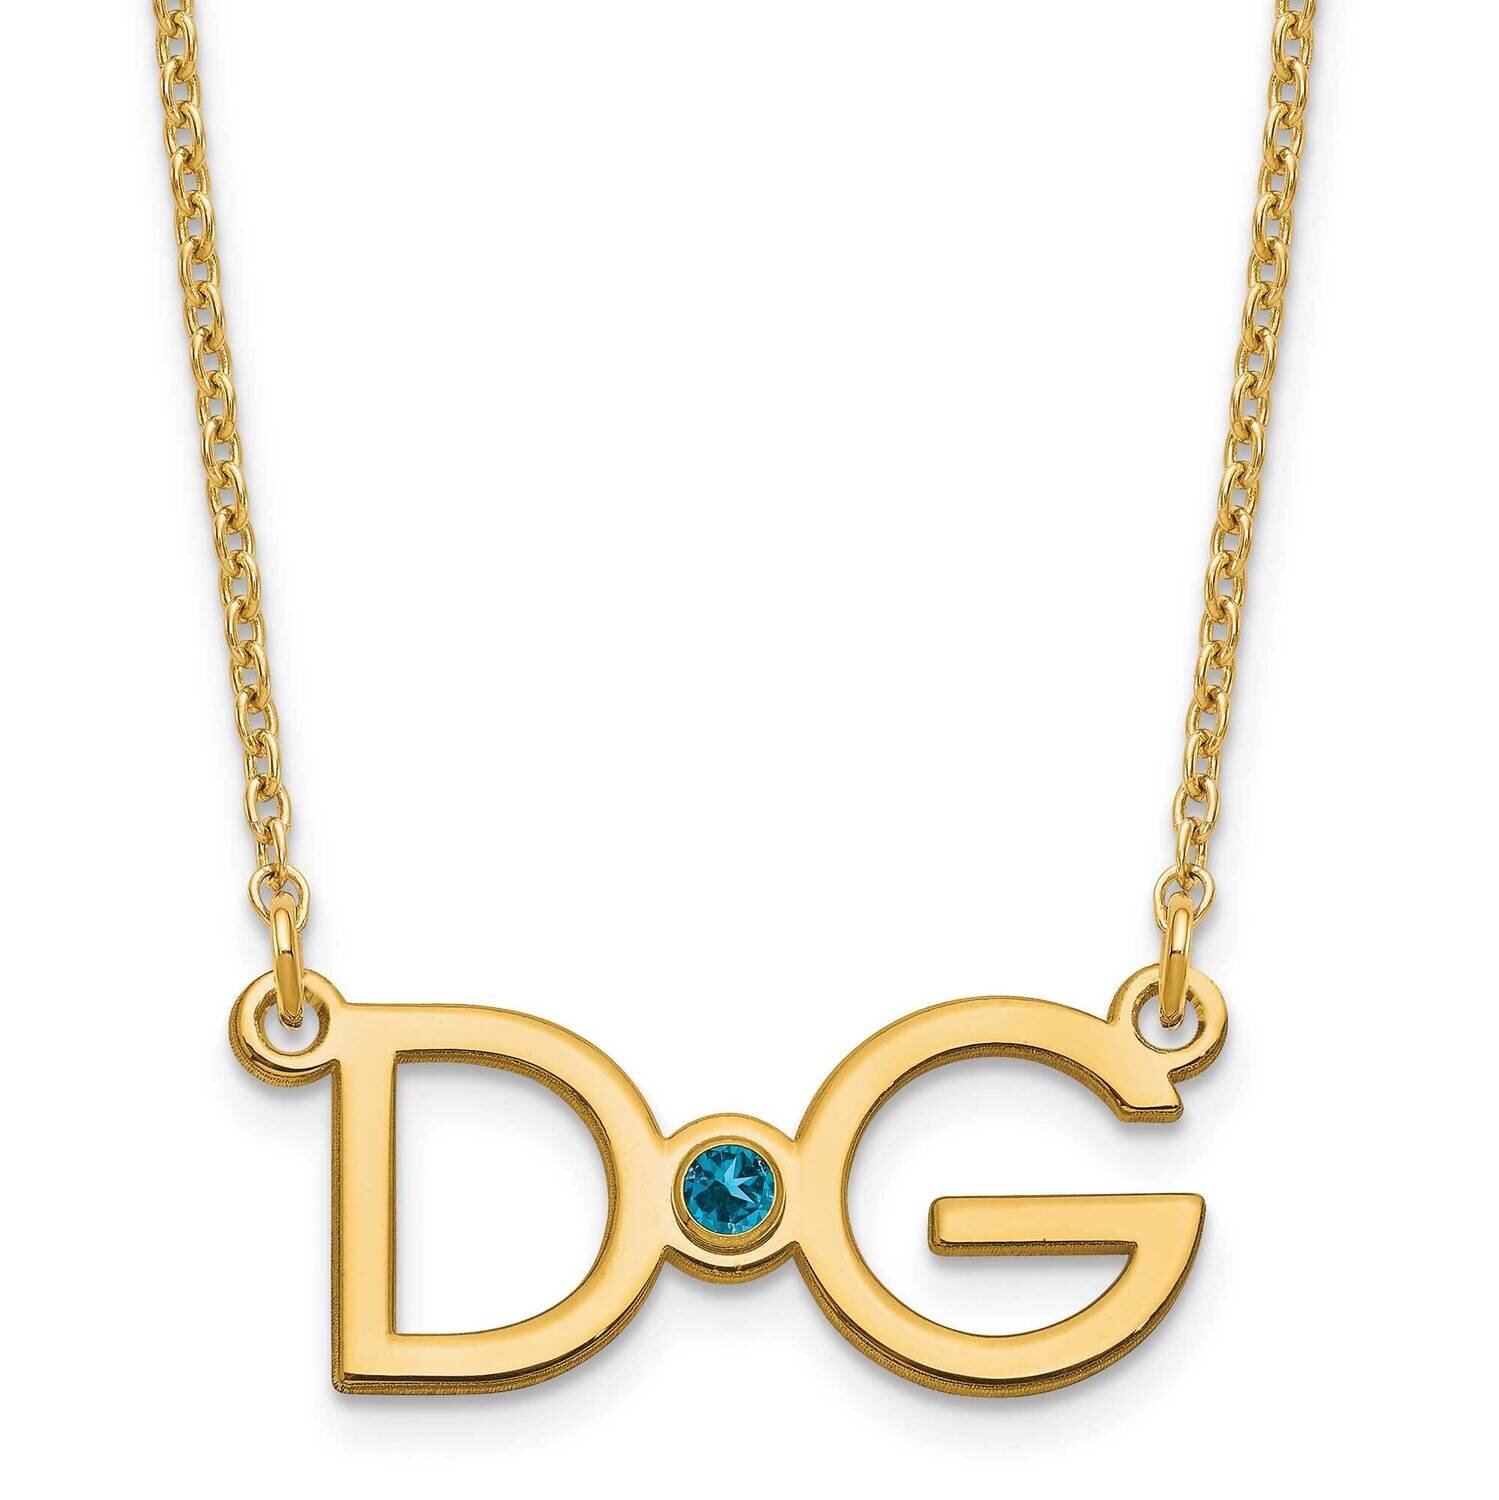 Large 2 Initial with Birthstone Necklace Sterling Silver Gold-plated XNA1252GP